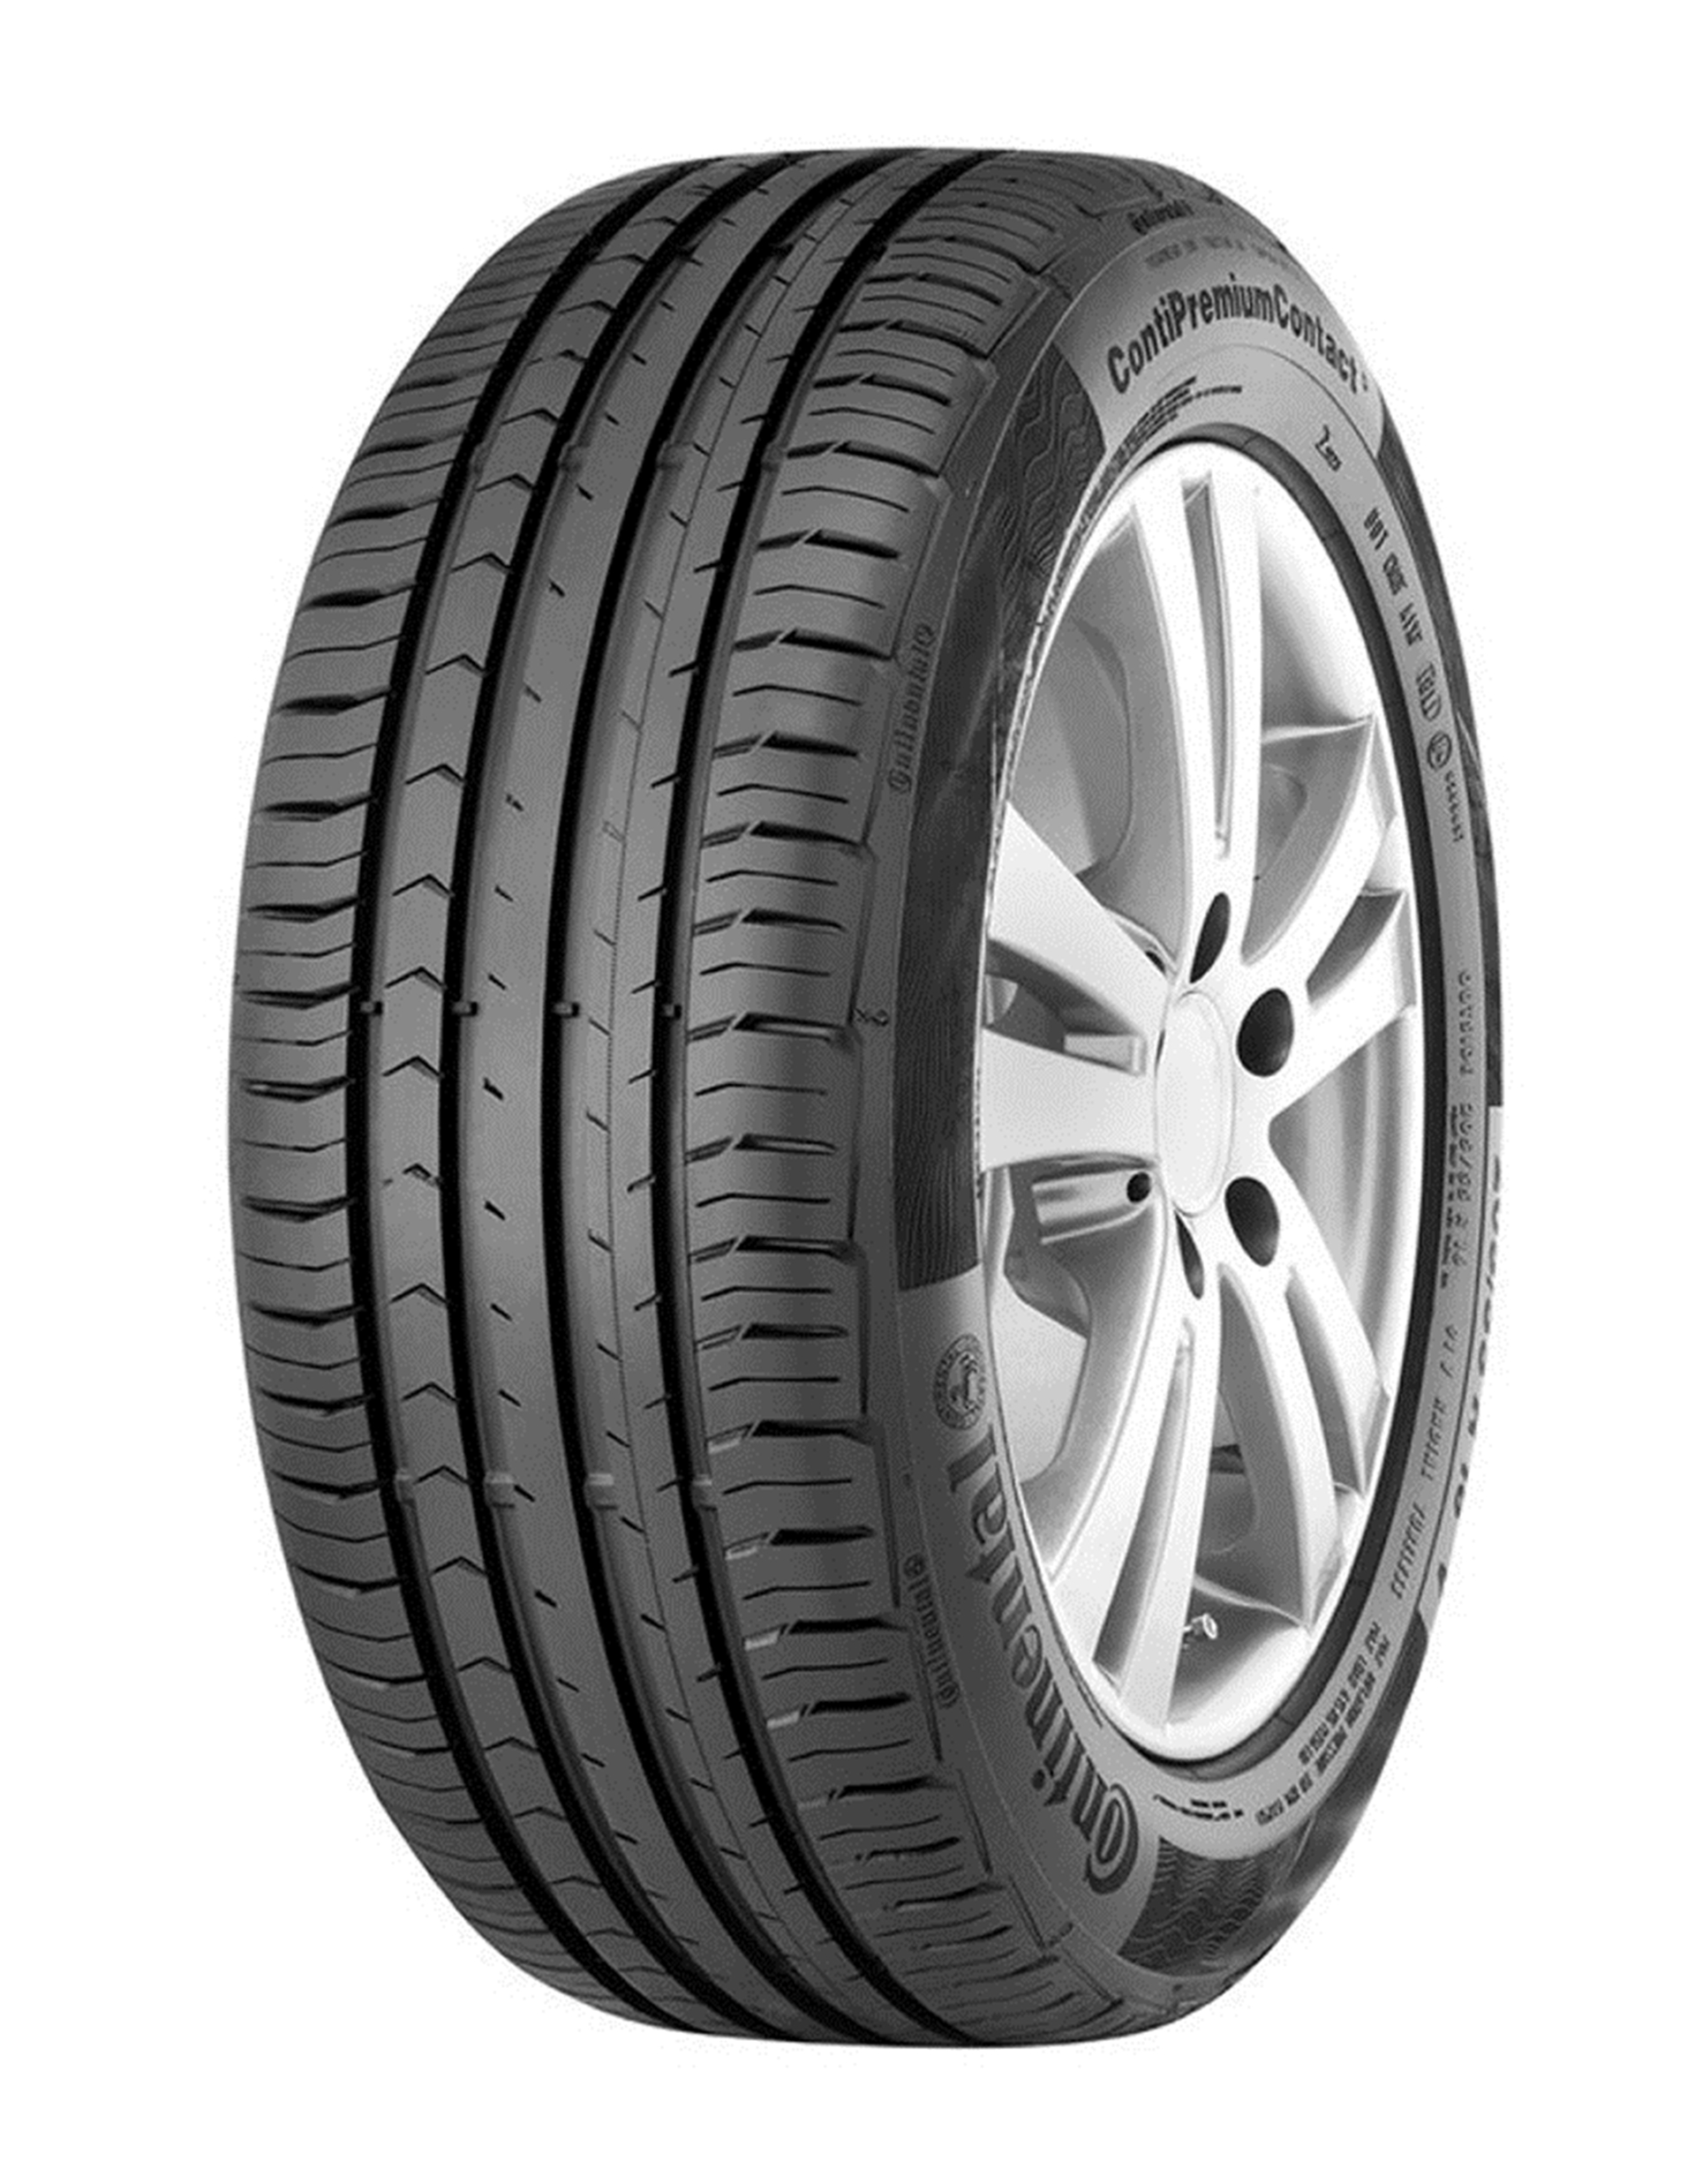 Continental Tyre: Contipremiumcontact 5 – The Perfect All-Rounder